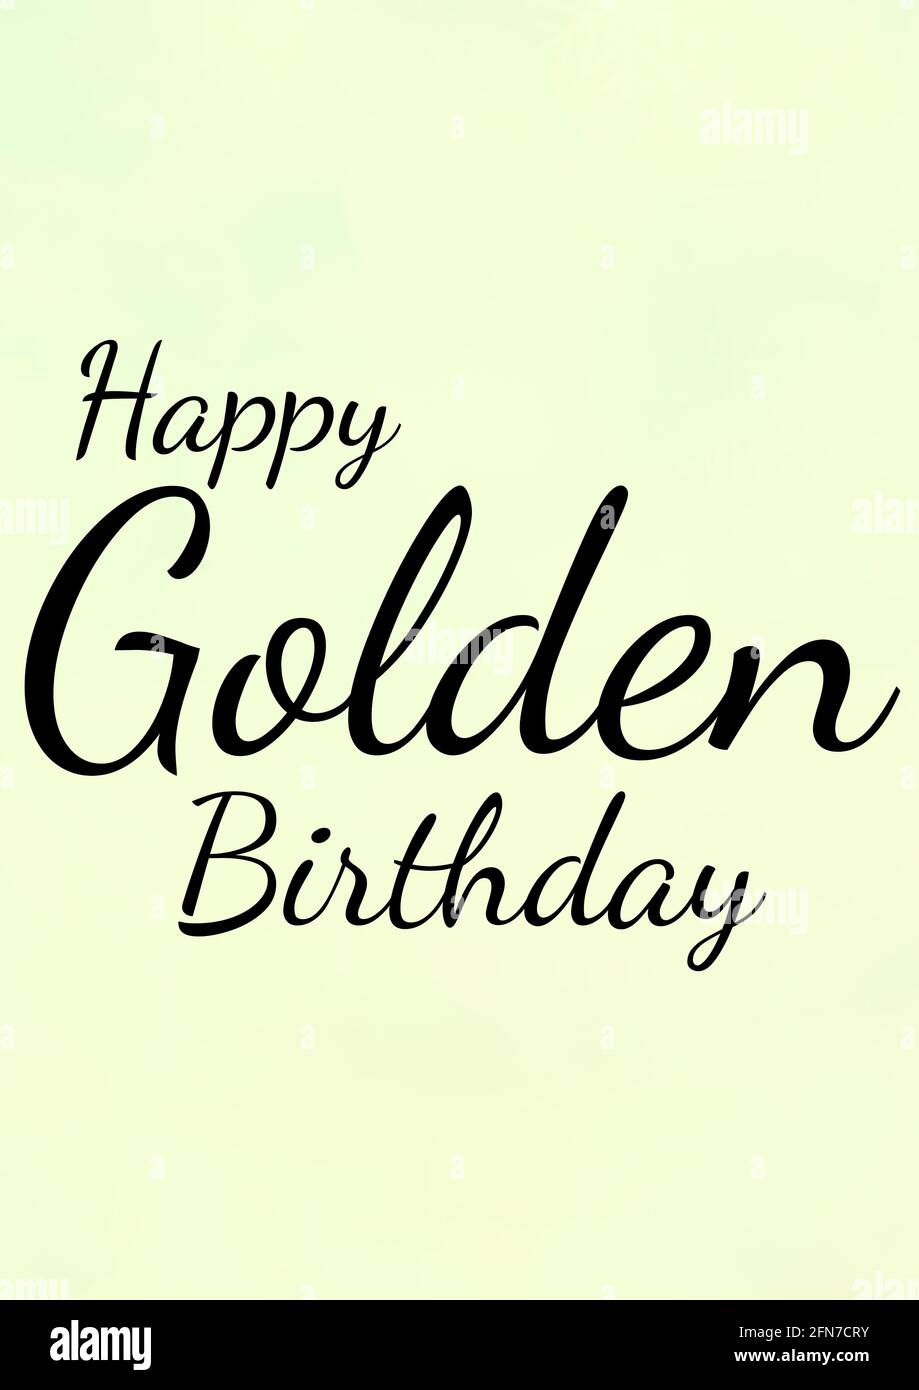 Composition of happy golden birthday text on light green background Stock Photo